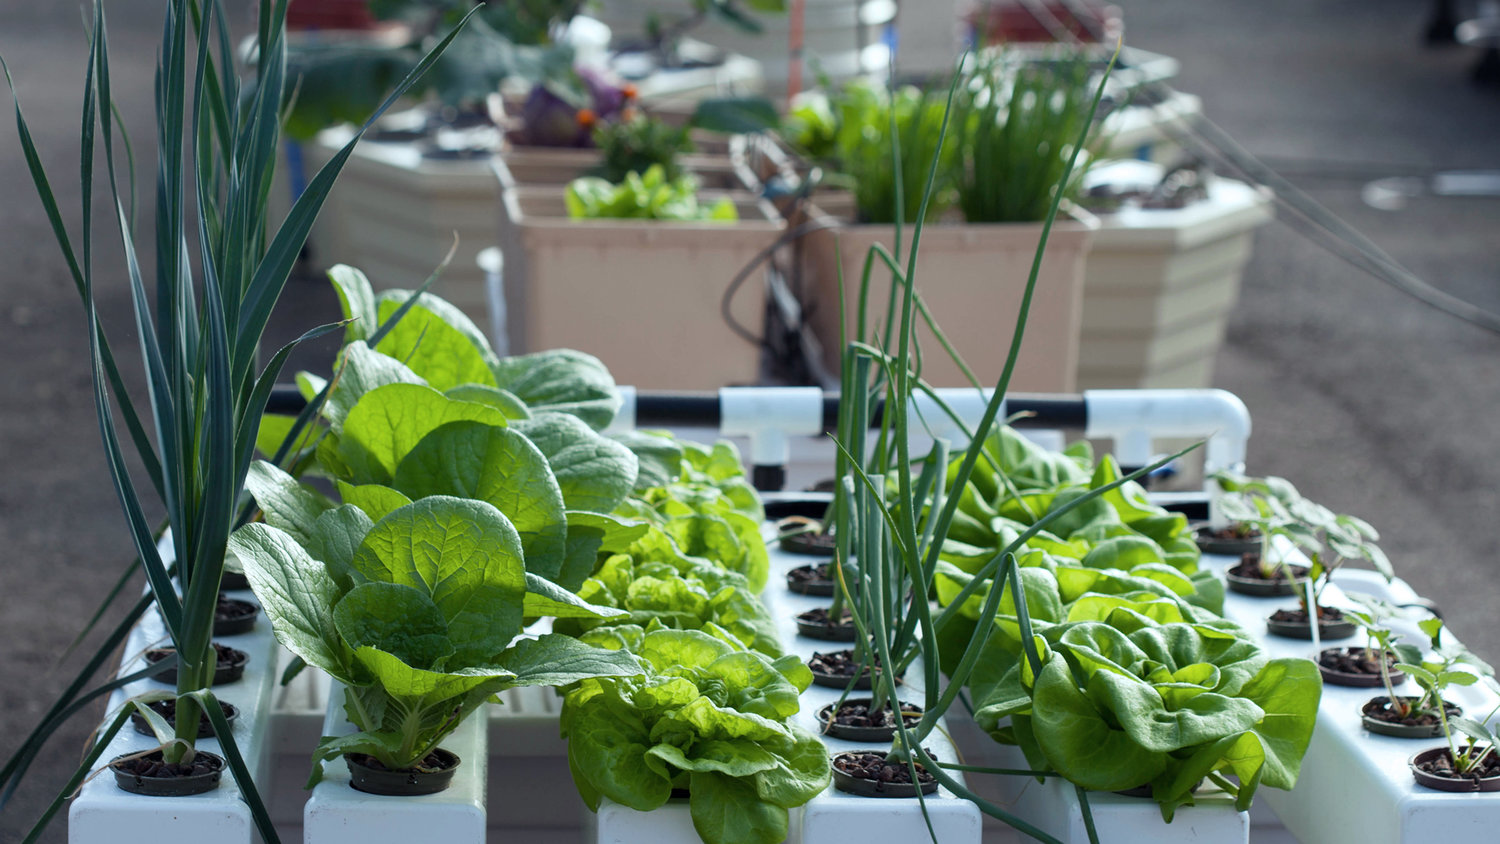 How to make a hydroponics system